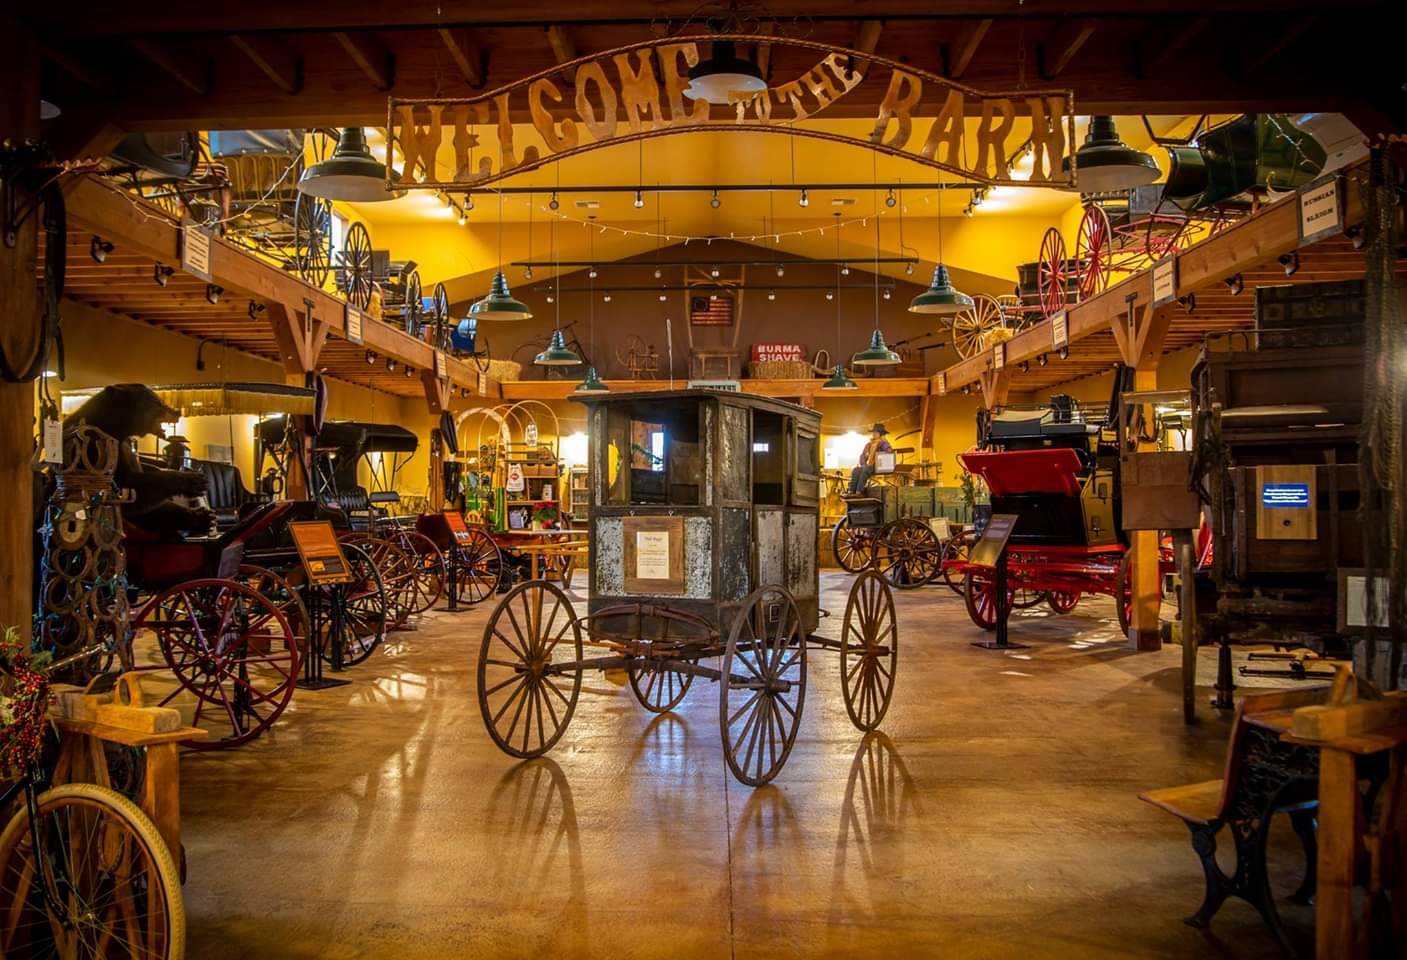 While the Northwest Carriage Museum is only operating at 25% capacity by following Washington Safety Protocol, it’s a 10,000-square-foot facility, which means there’s plenty of room to spread out and dozens of people could attend safely at one time (Courtesy of Northwest Carriage Museum)